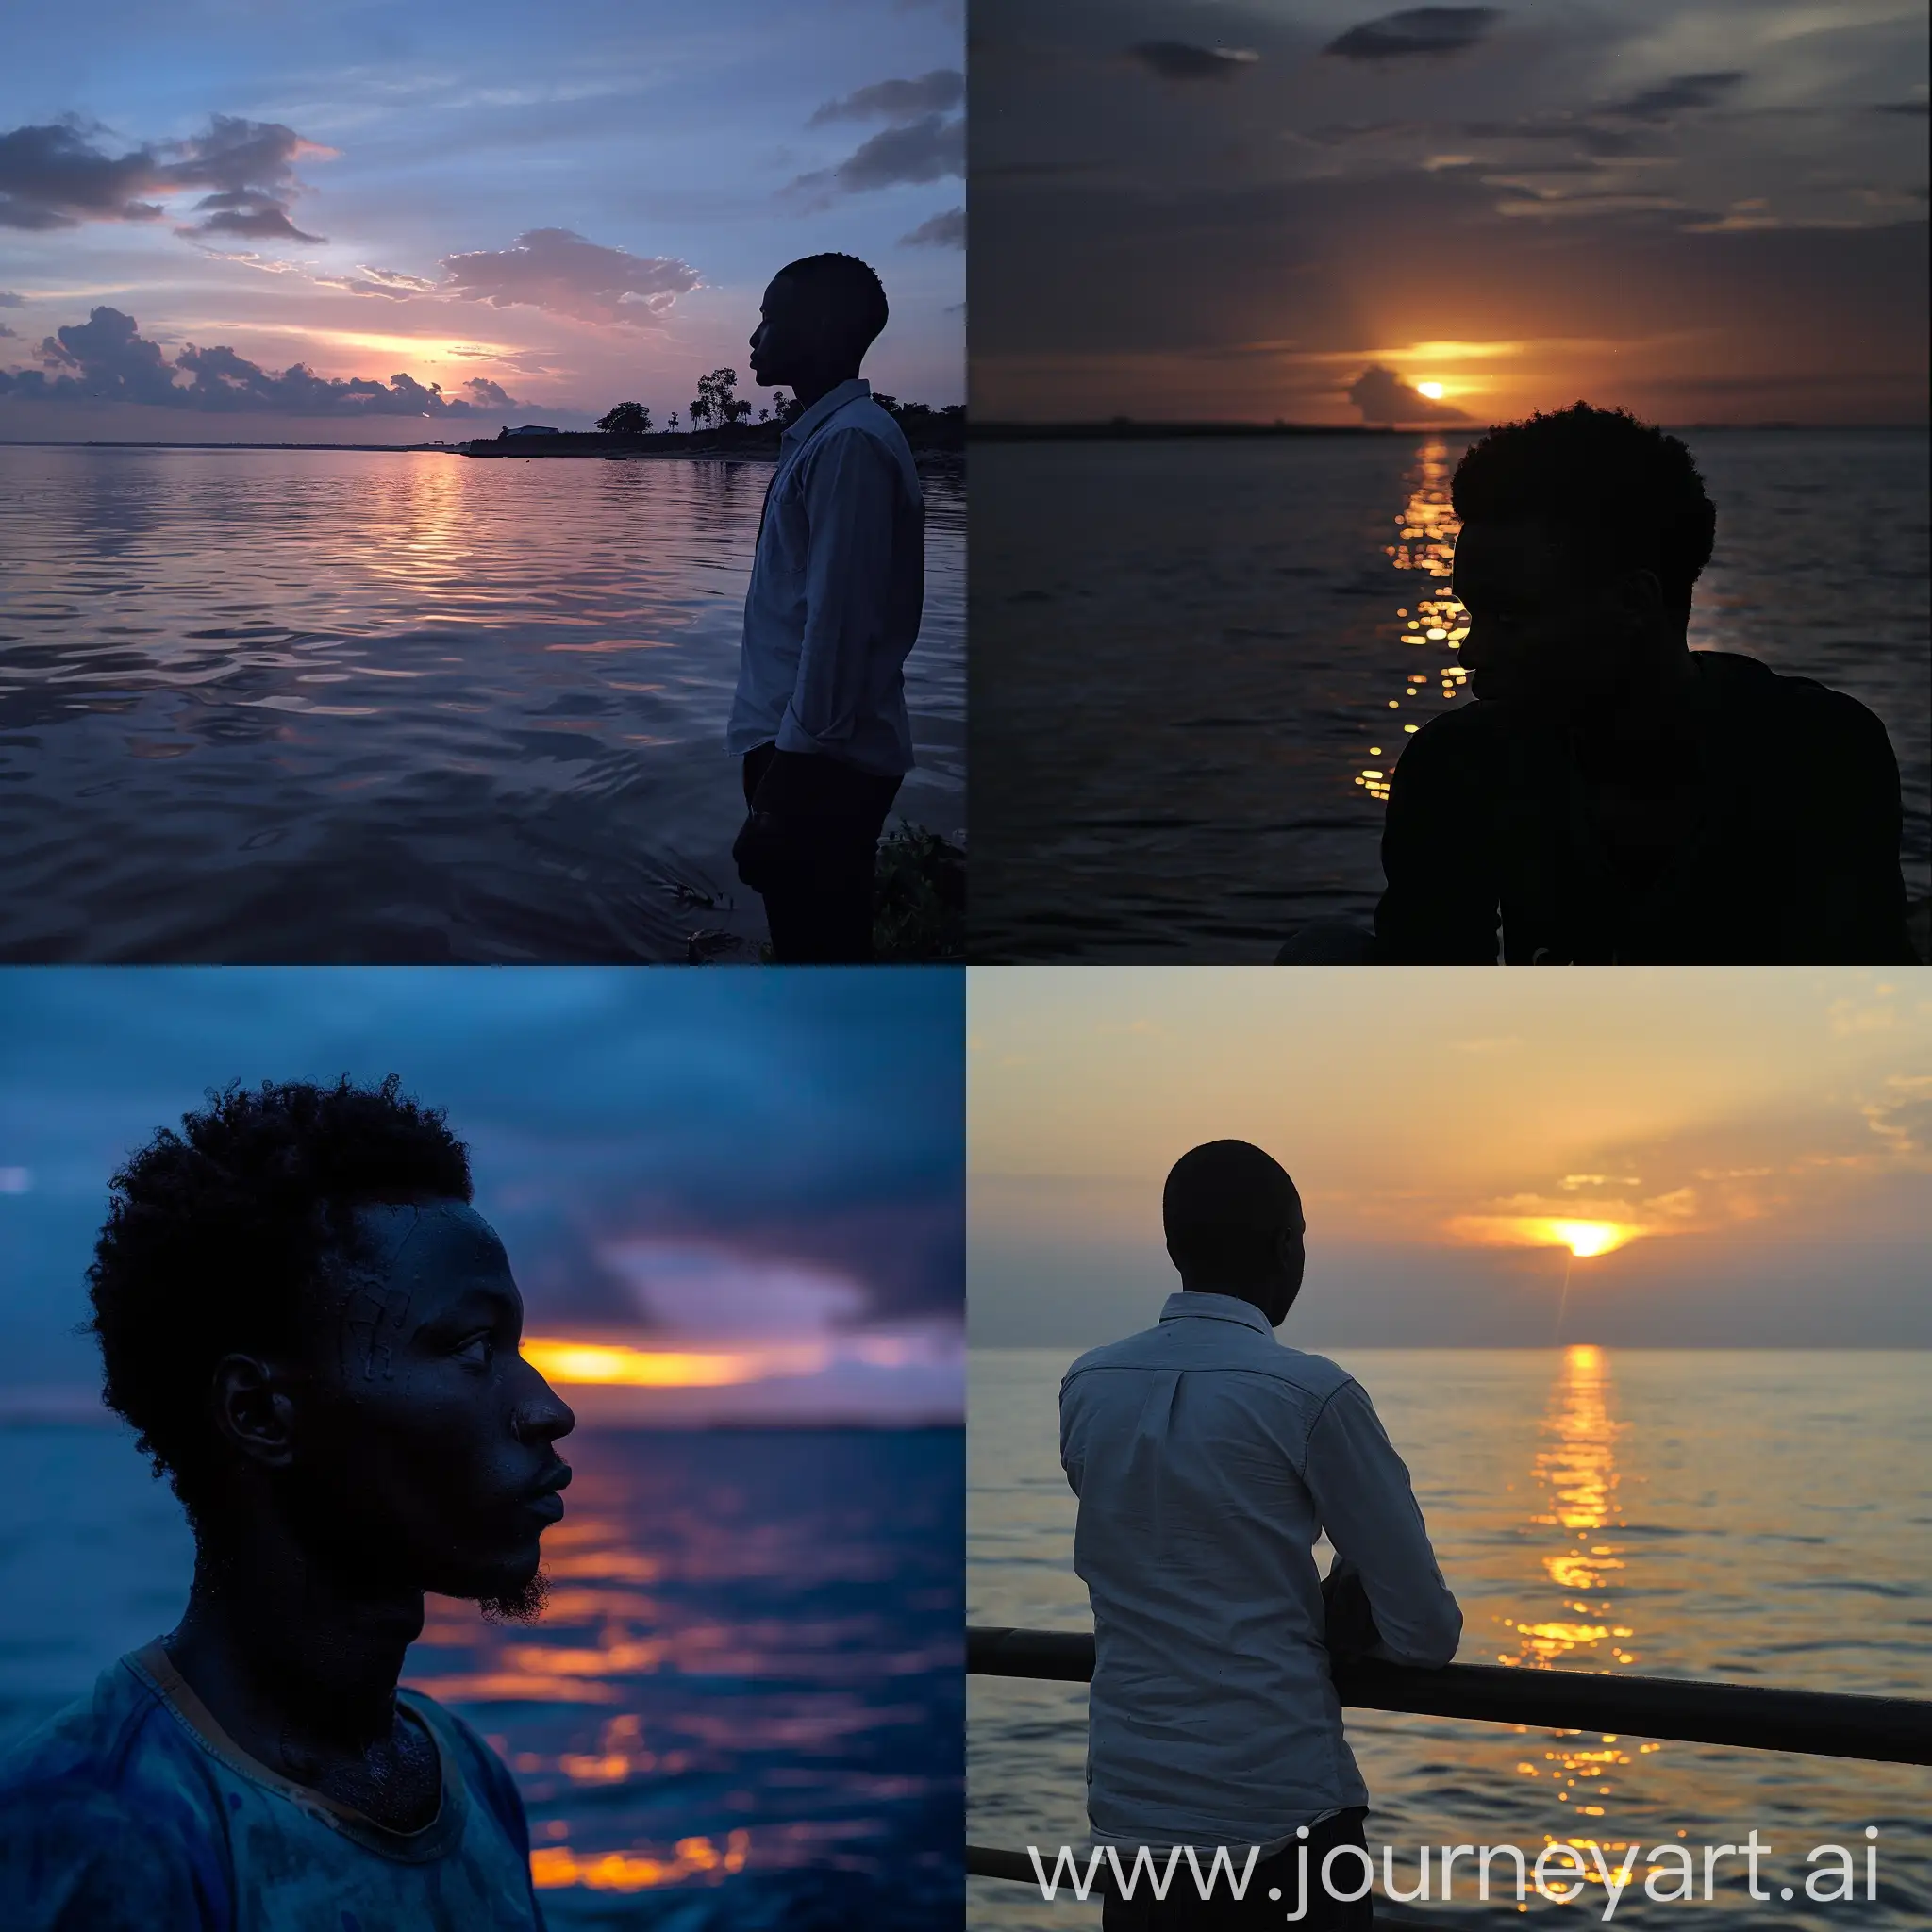 One evening, as the sun dipped below the horizon, casting a warm glow across the water, Kofi made a decision. 